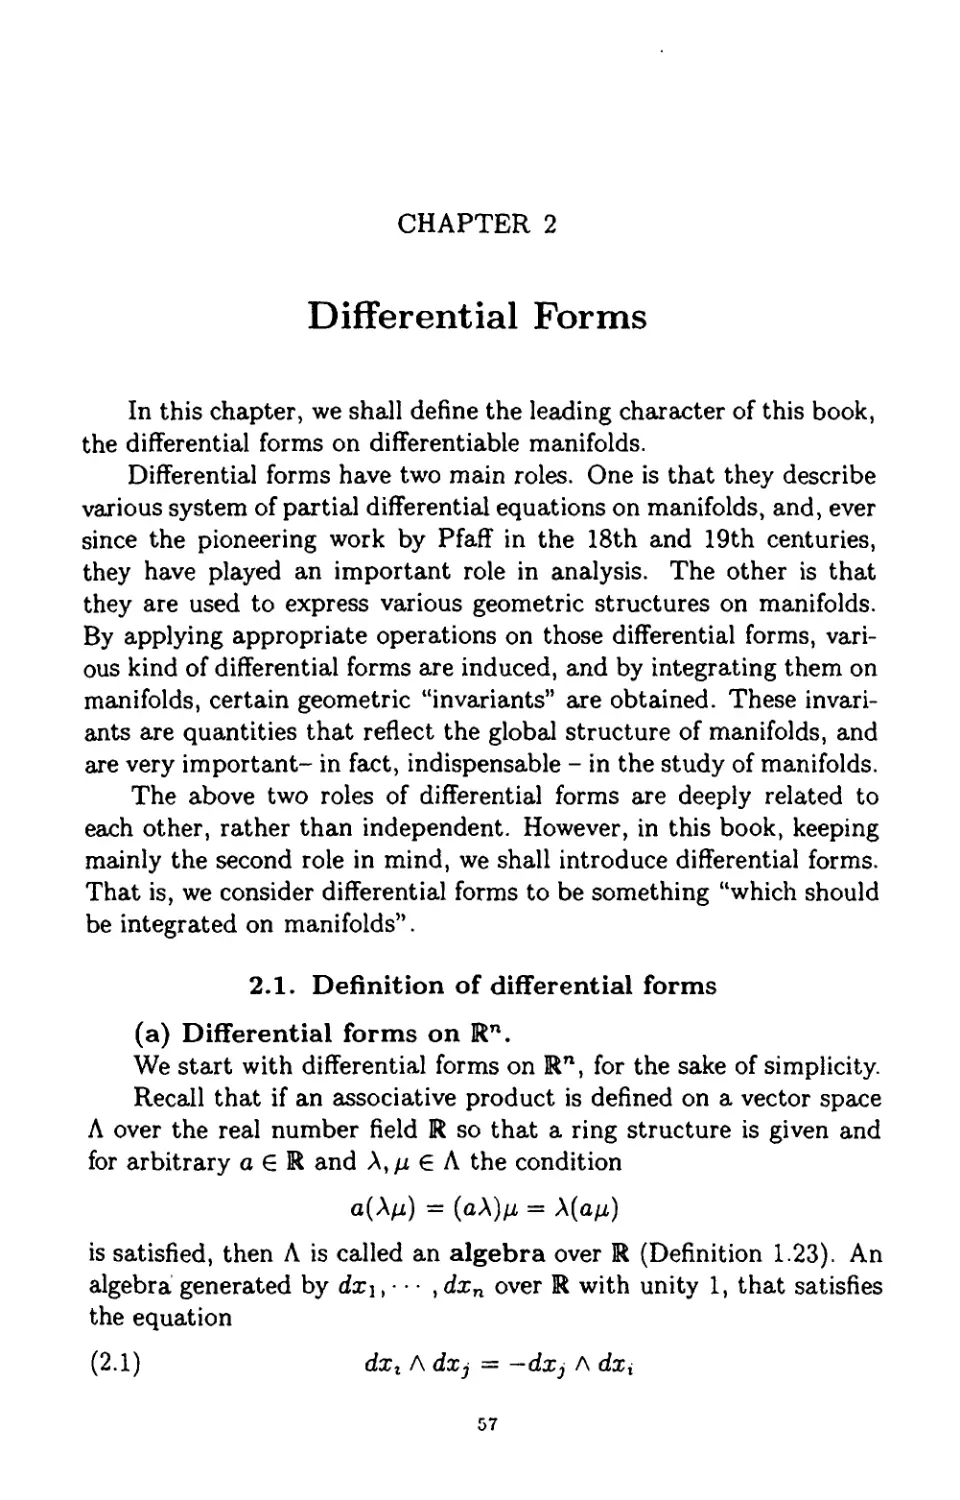 Chapter 2 Differential Forms
57